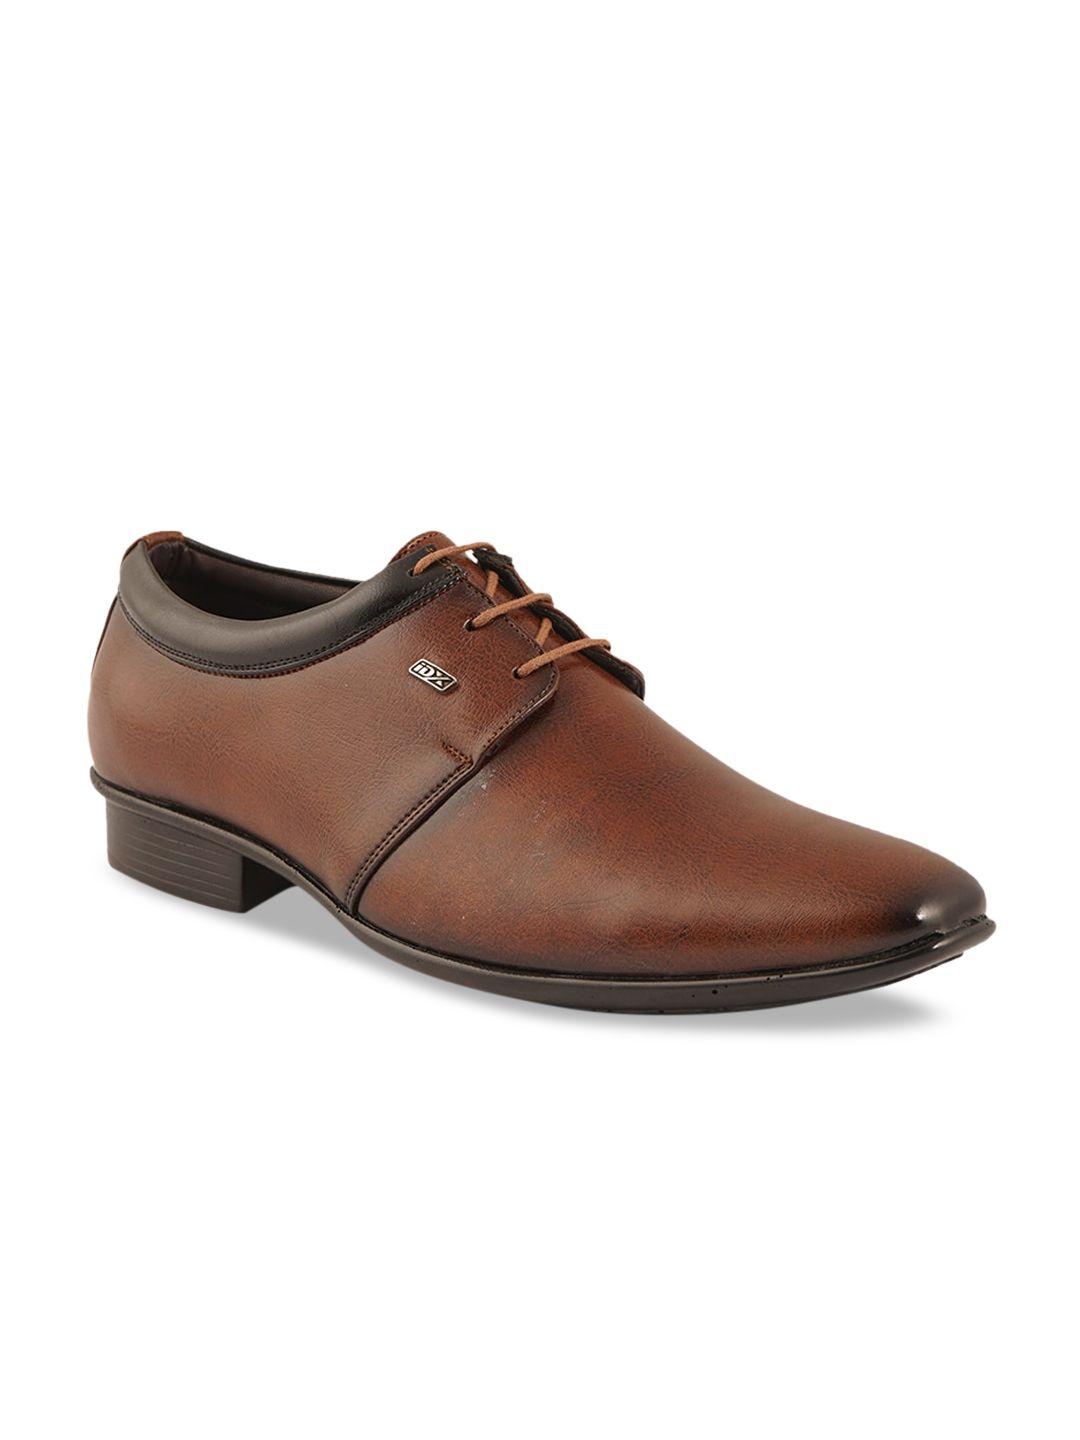 id-men-solid-lace-up-oxfords-formal-shoes